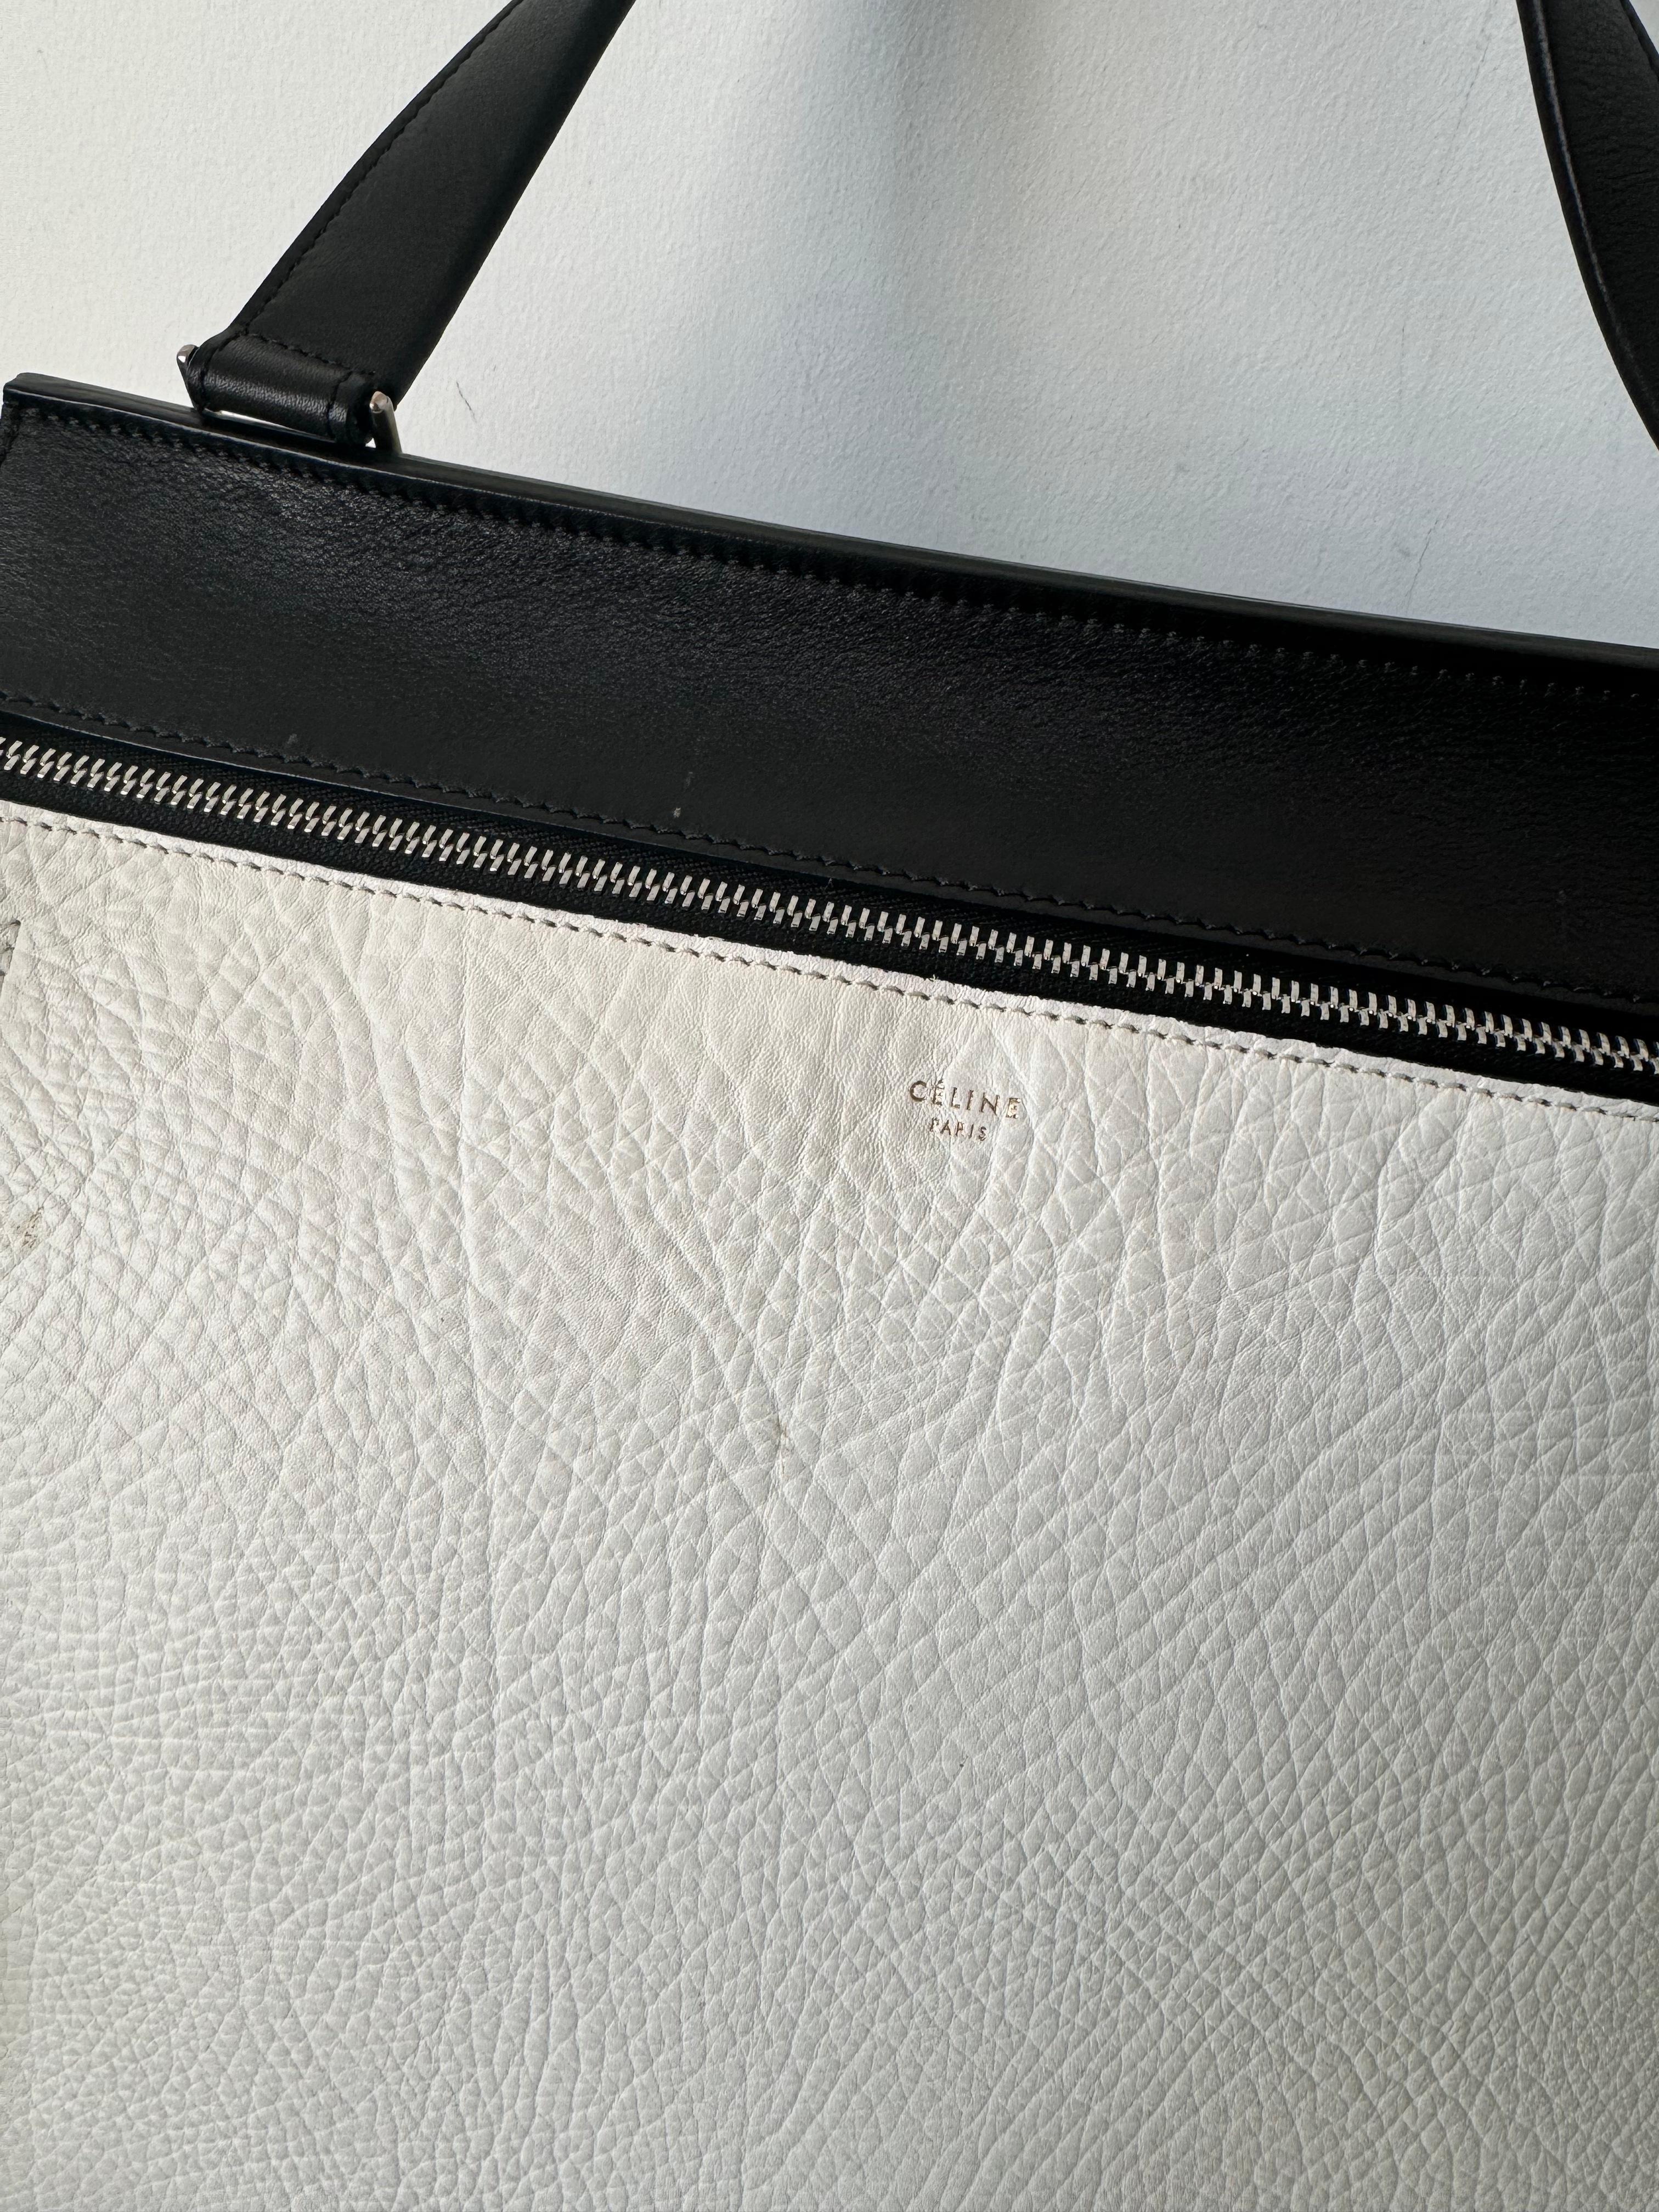 The preloved Celine Black/White 2 Tone Medium Edge Bag, designed by Phoebe Philo, represents a sophisticated blend of modernity and timeless elegance. Here's an overview of this iconic bag:

Design and Style:
The Medium Edge Bag by Phoebe Philo for